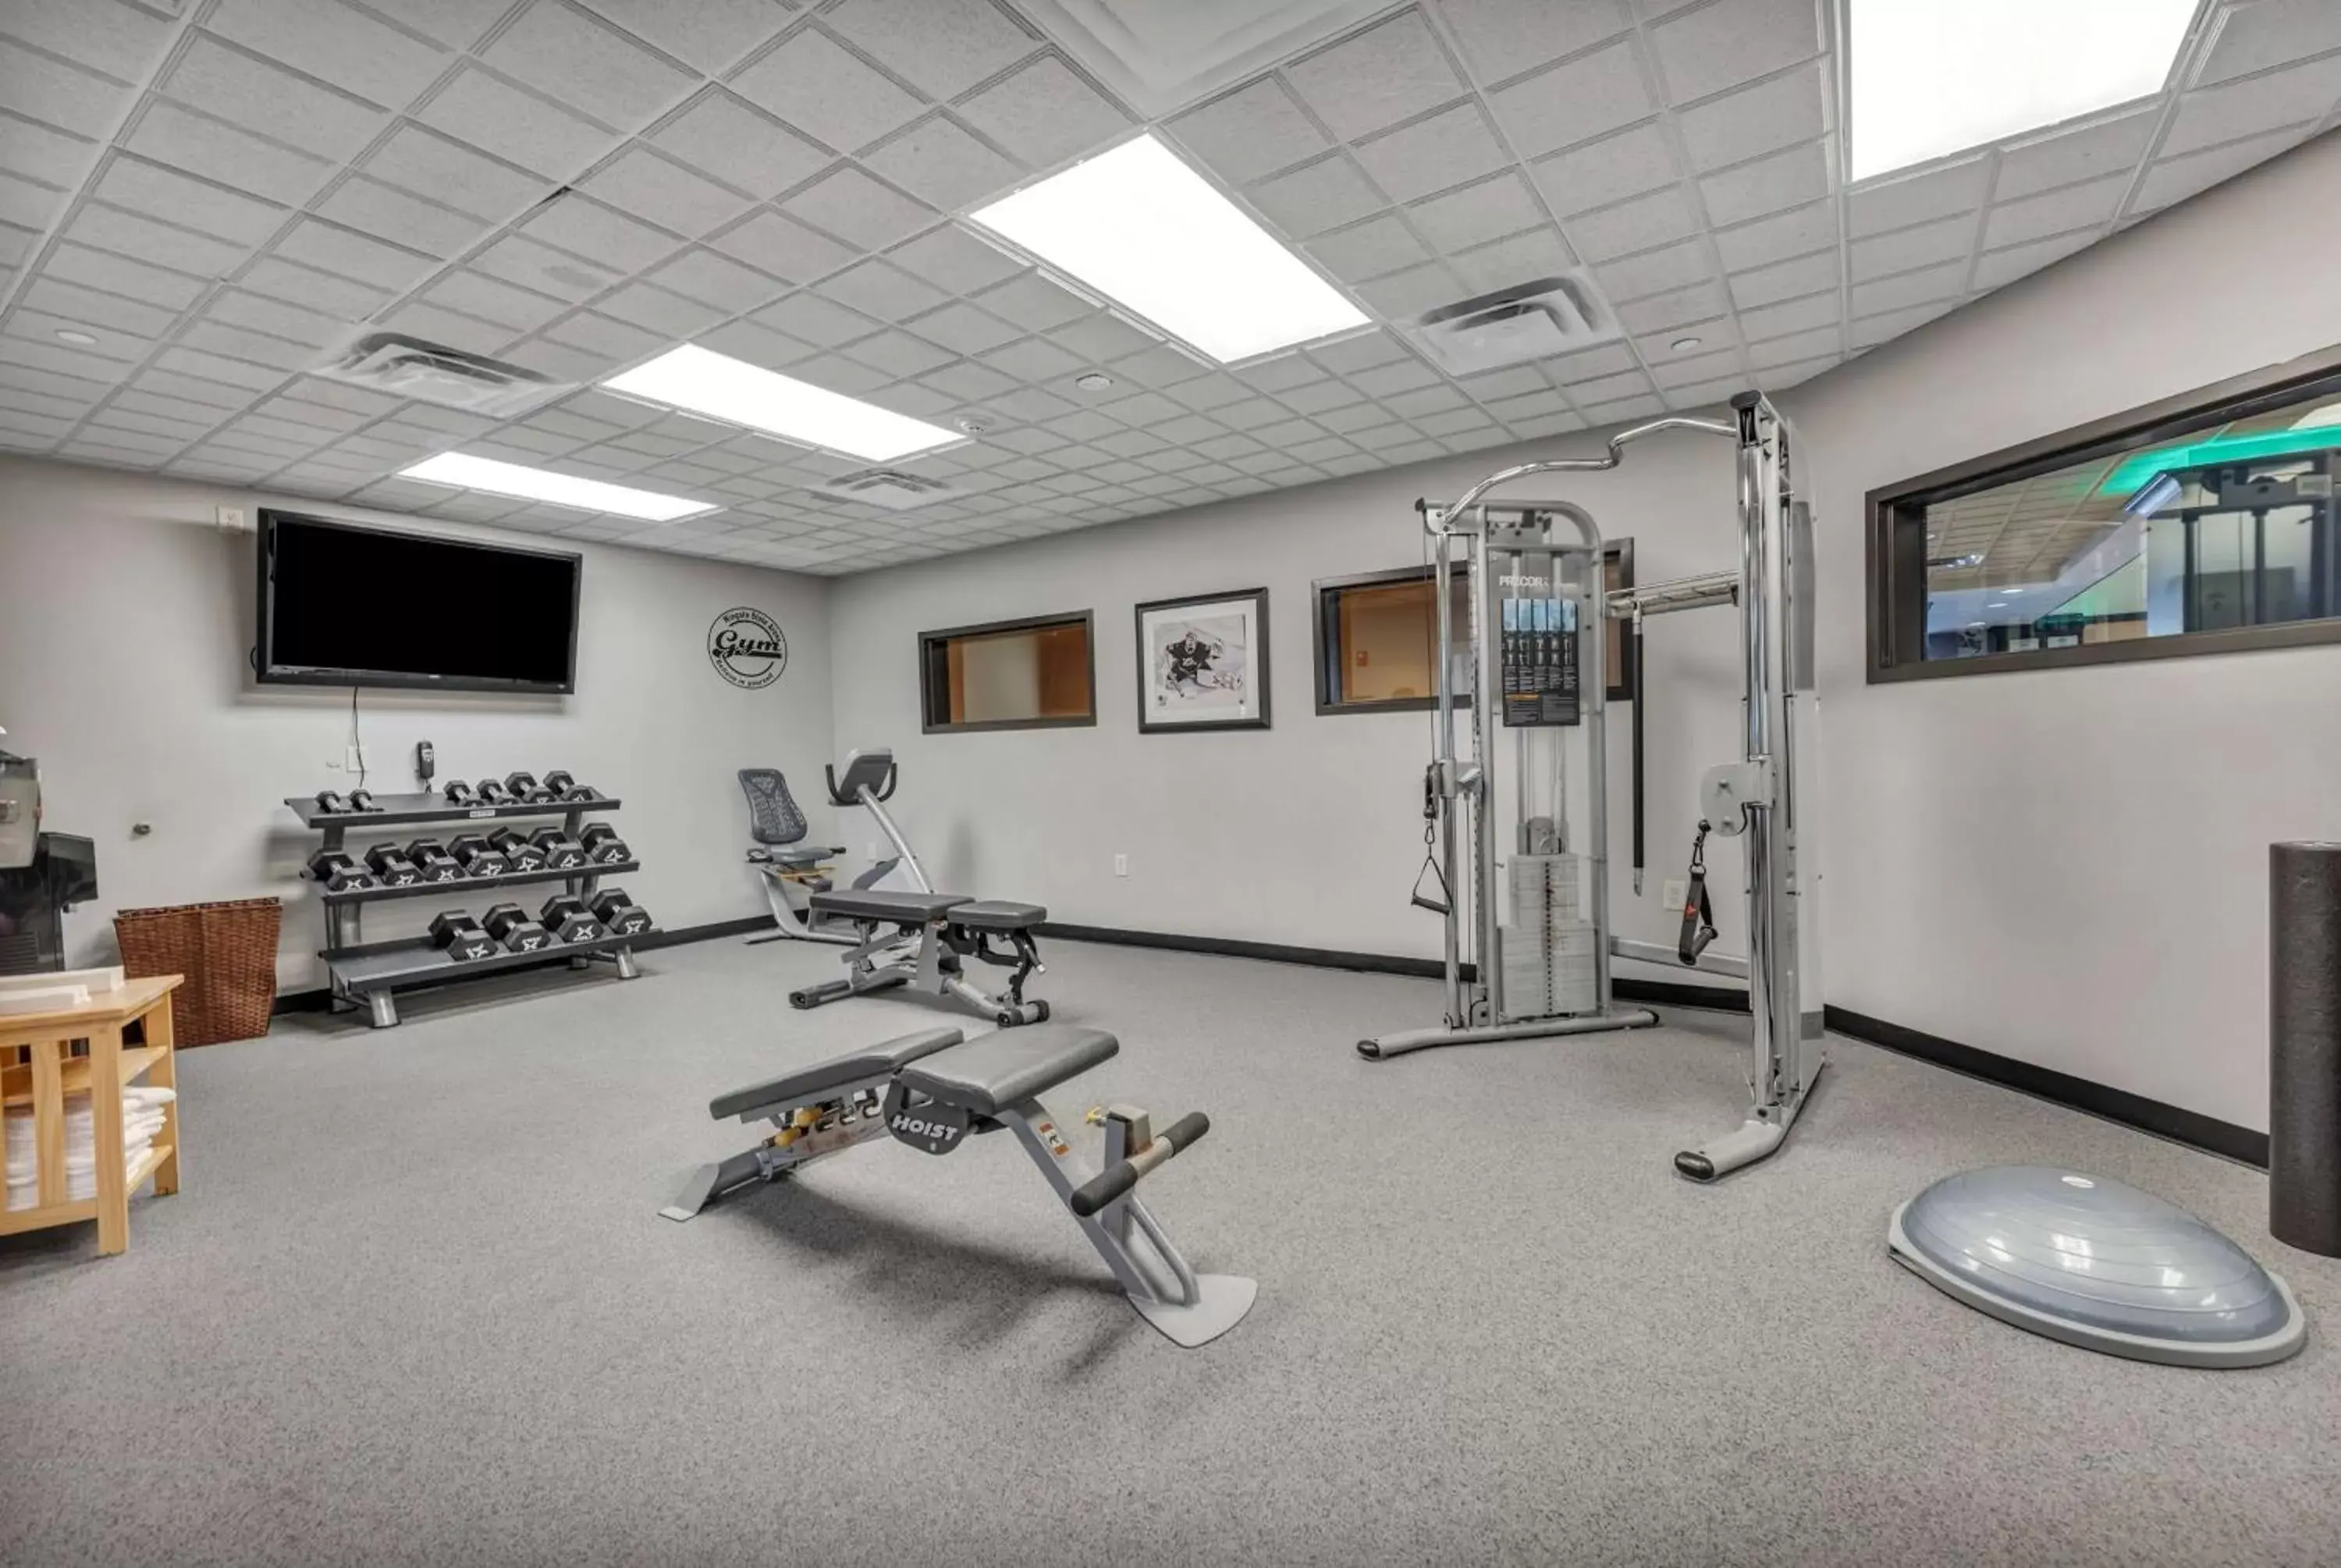 Fitness centre/facilities, Fitness Center/Facilities in Wingate by Wyndham State Arena Raleigh/Cary Hotel